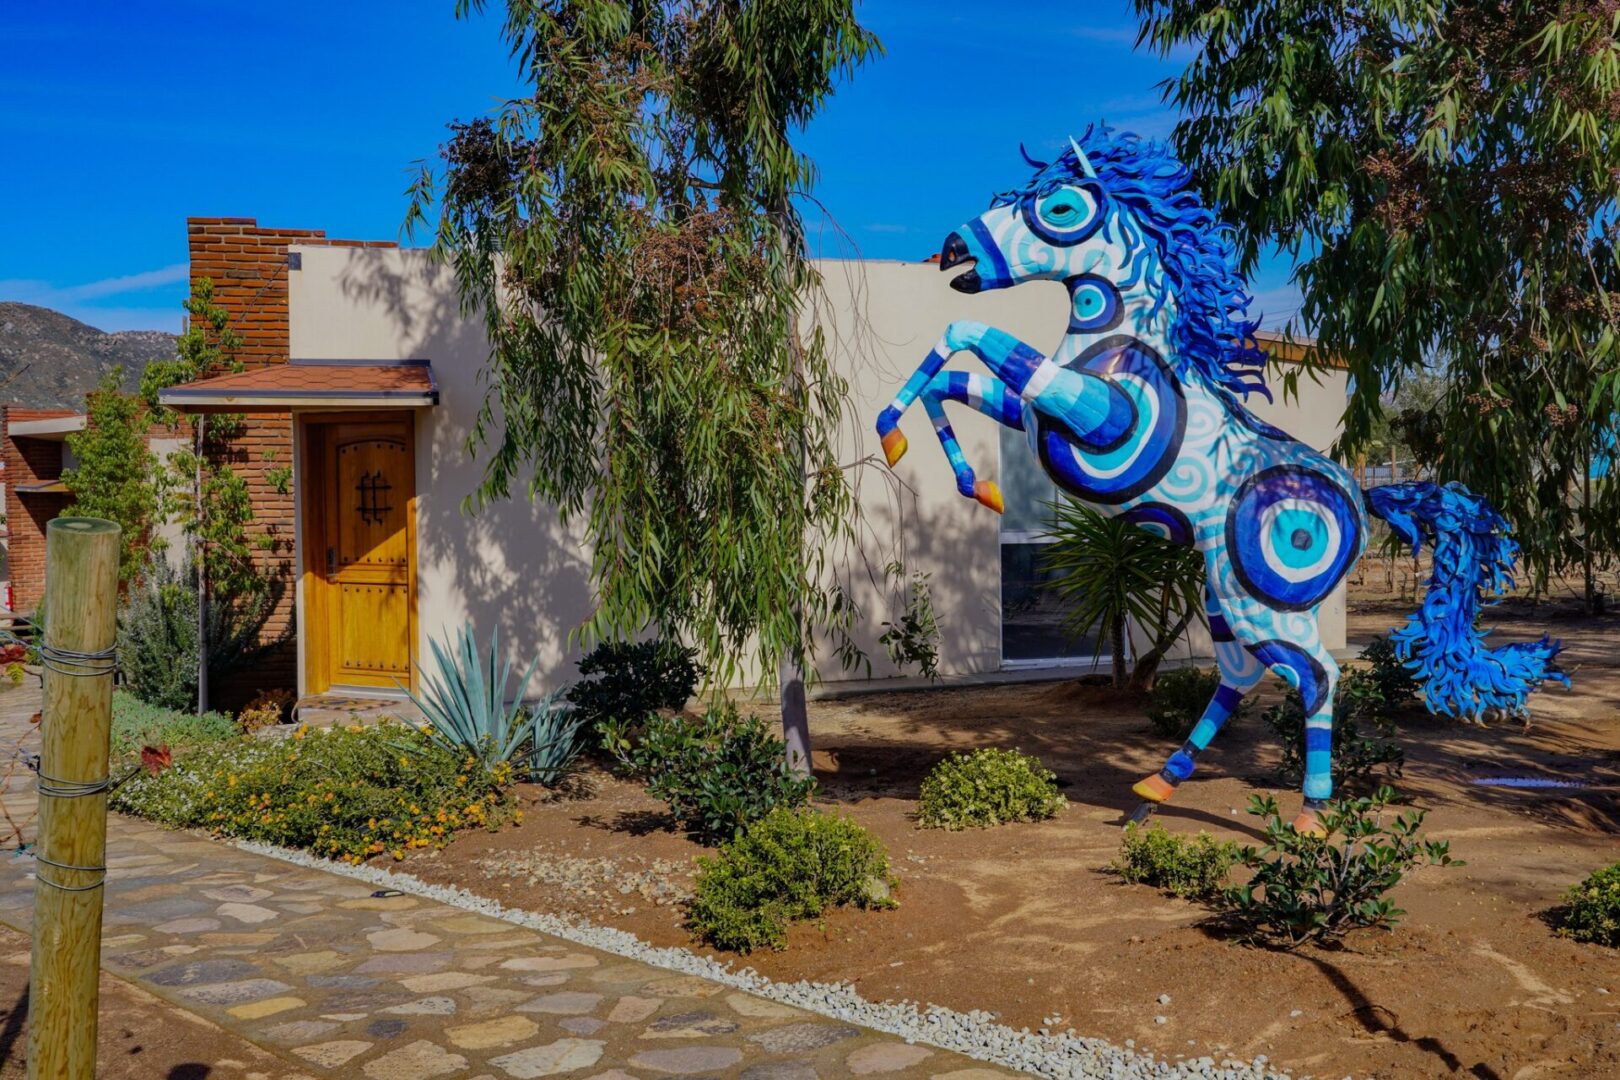 A blue horse statue in front of a building.